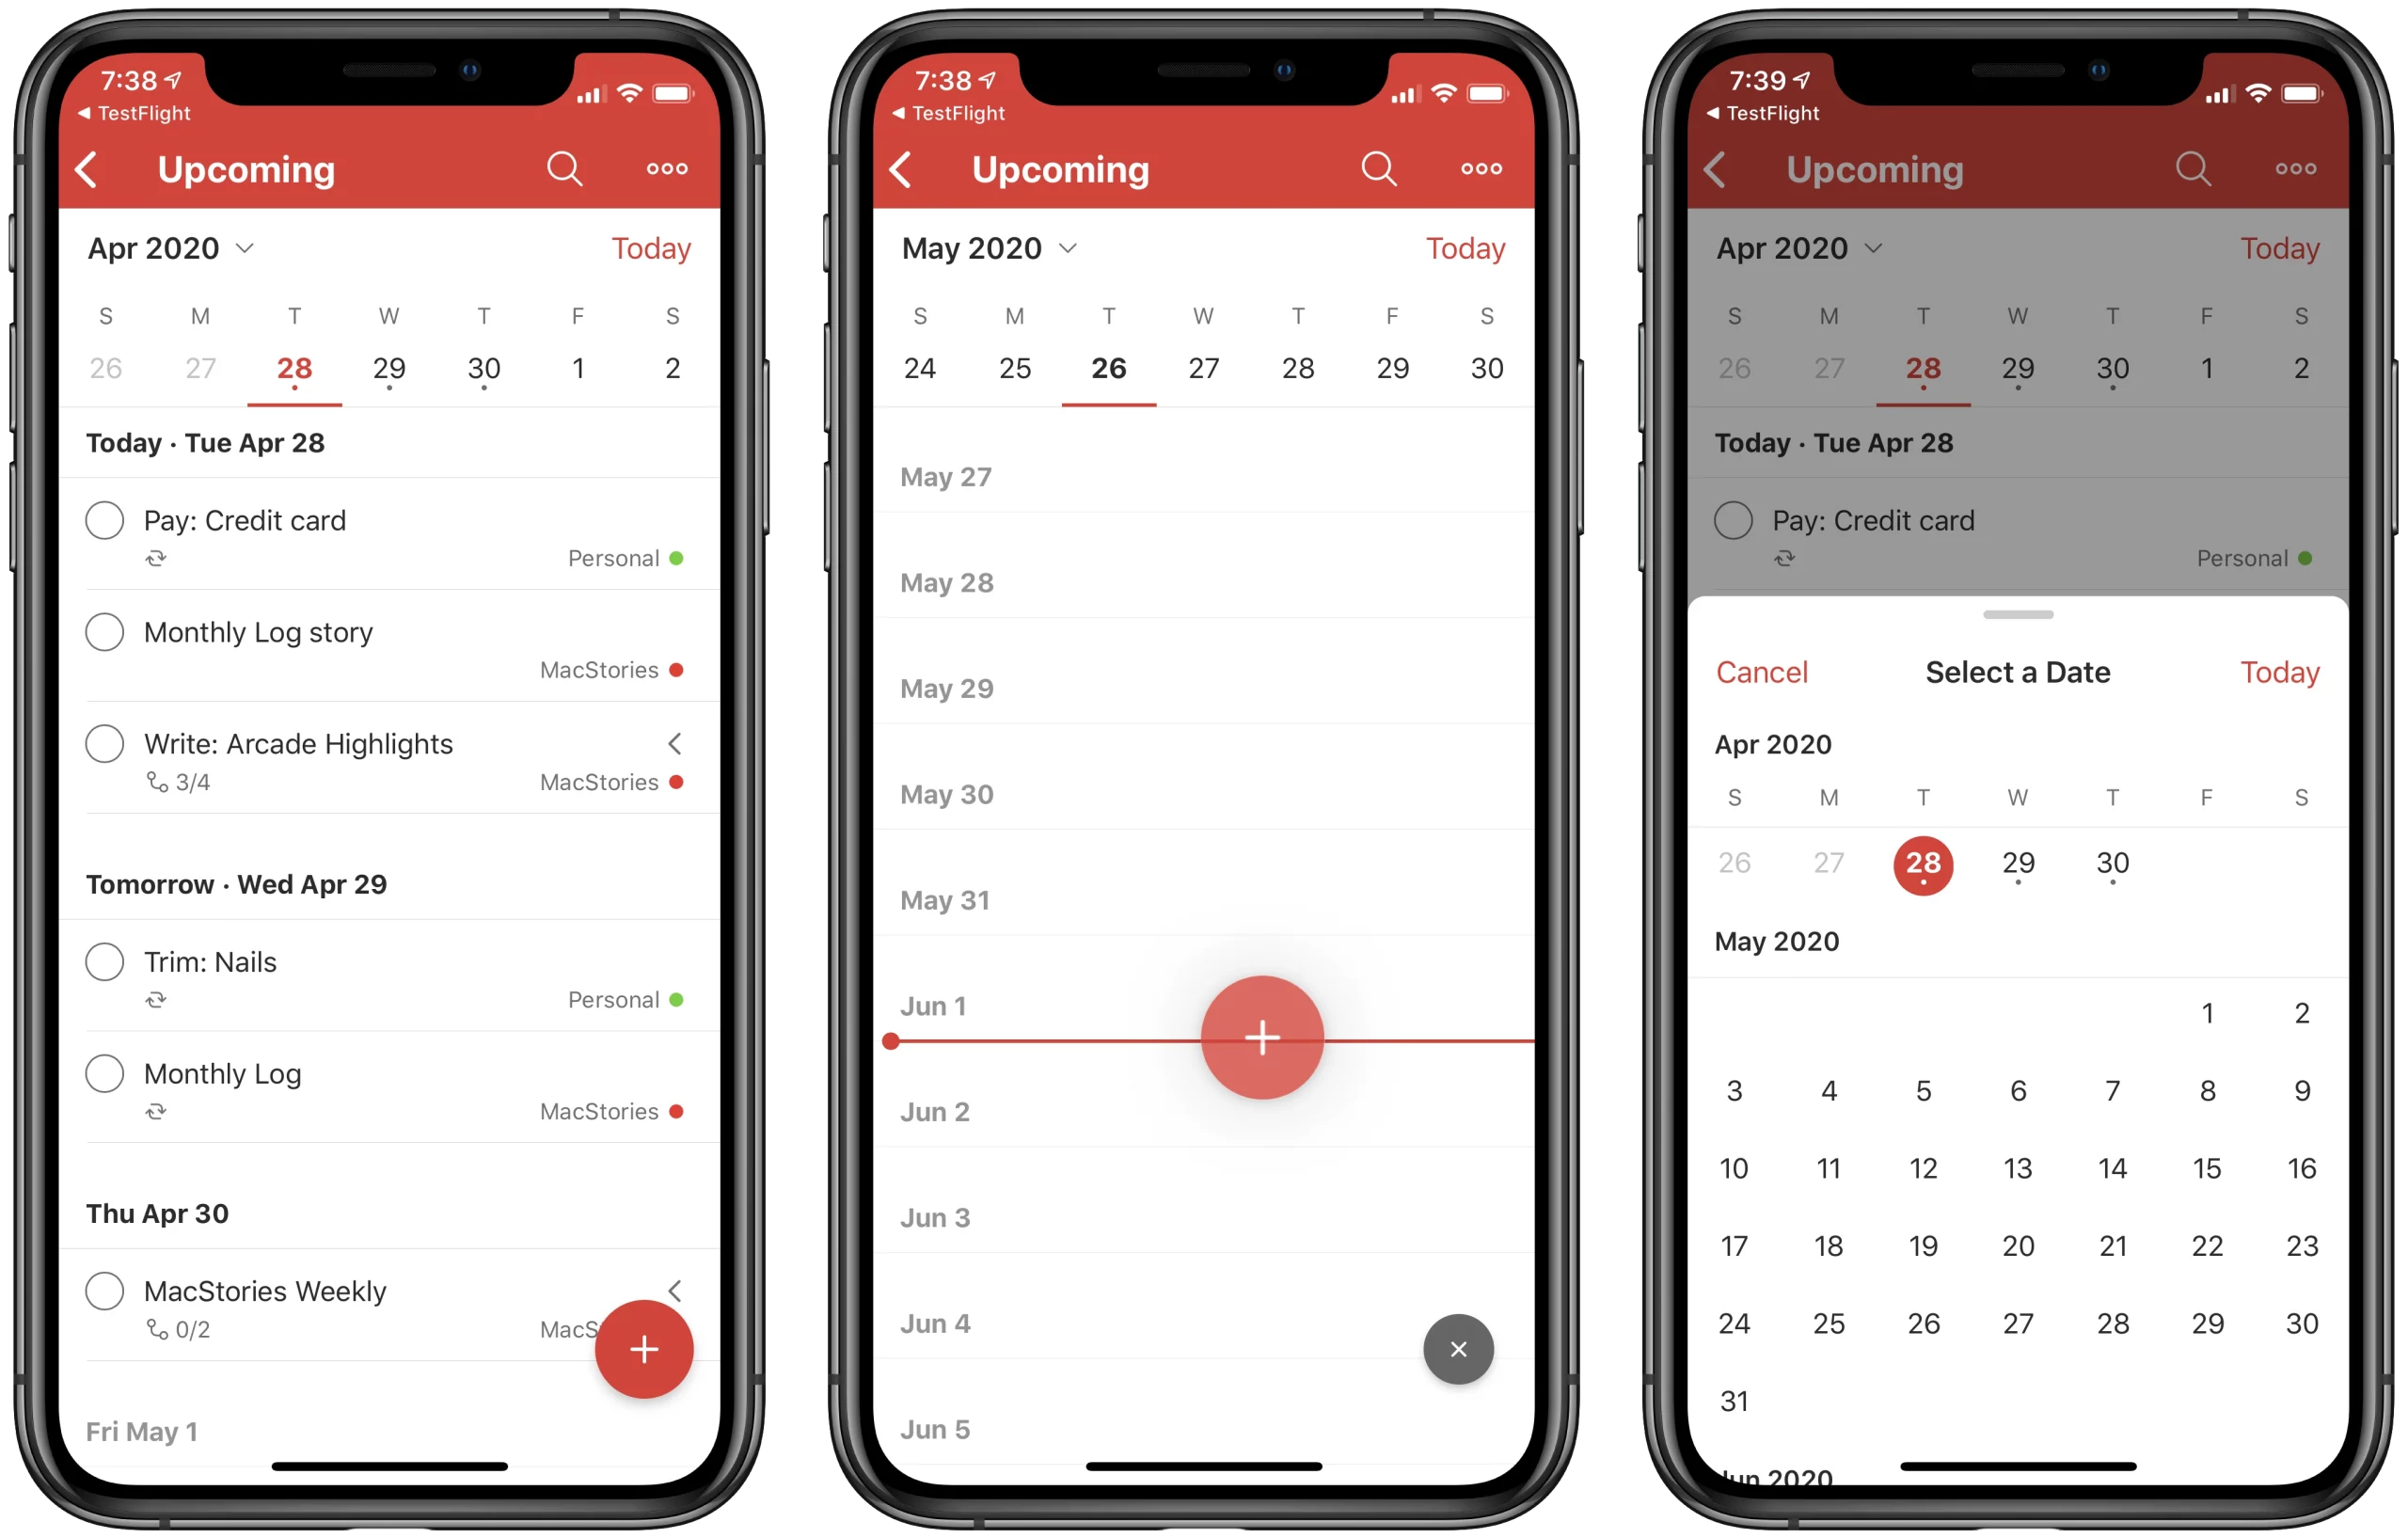 This article offers an in-depth review of ToDoist, highlighting its key features, system requirements, and overall impact on productivity.